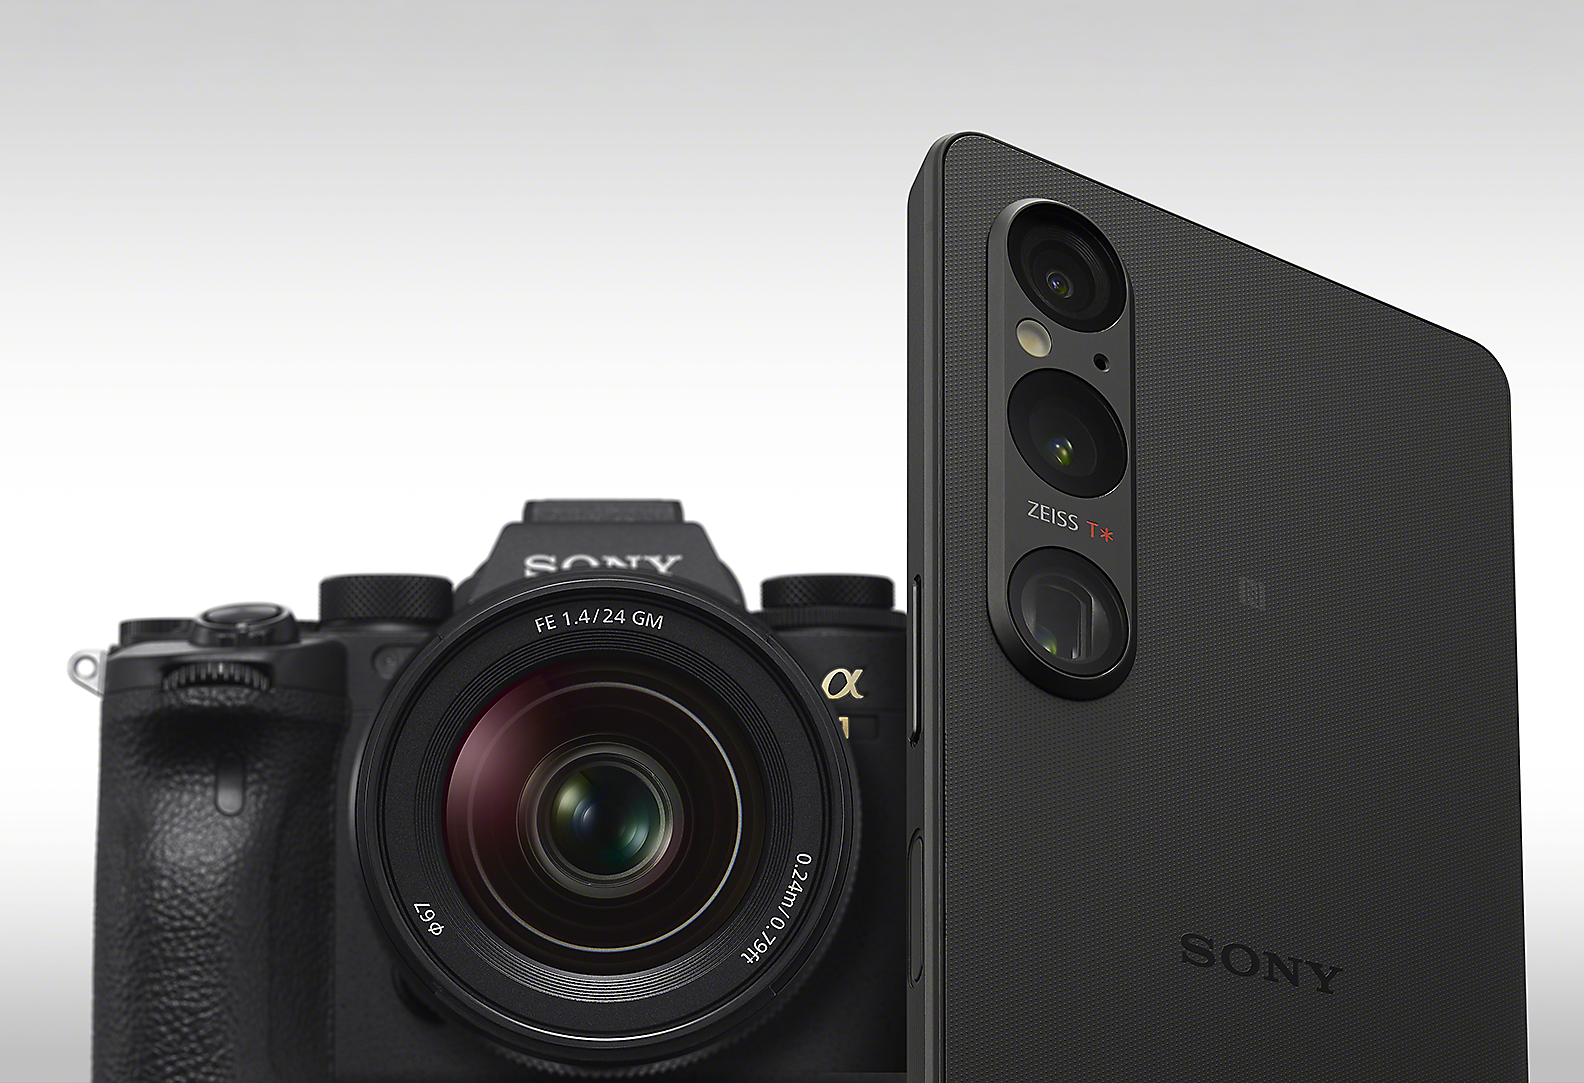 An Xperia 1 V in the foreground, a Sony Alpha camera in the background